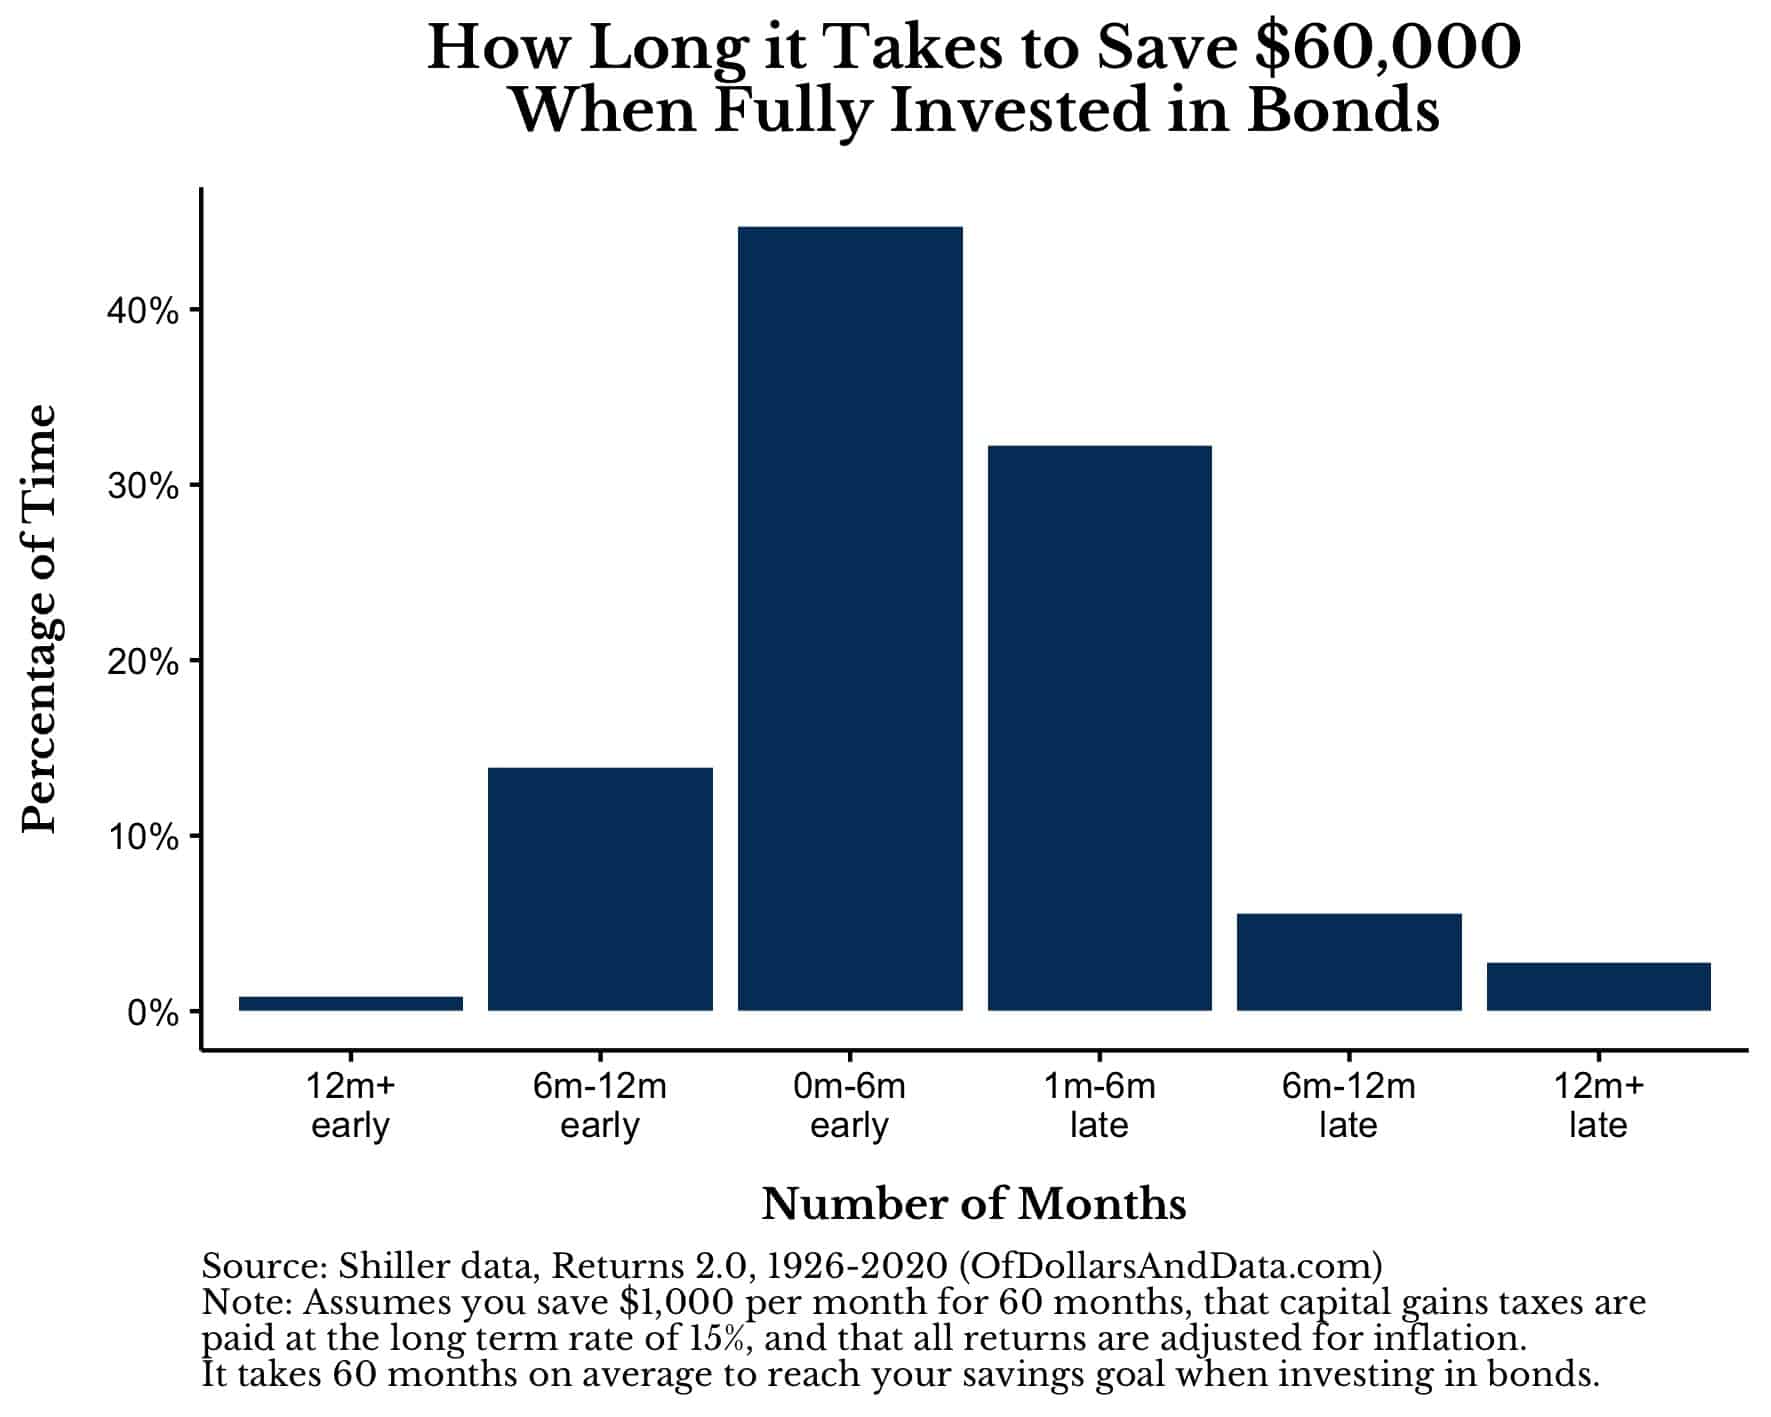 How long it takes to save $60,000 when fully invested in bonds